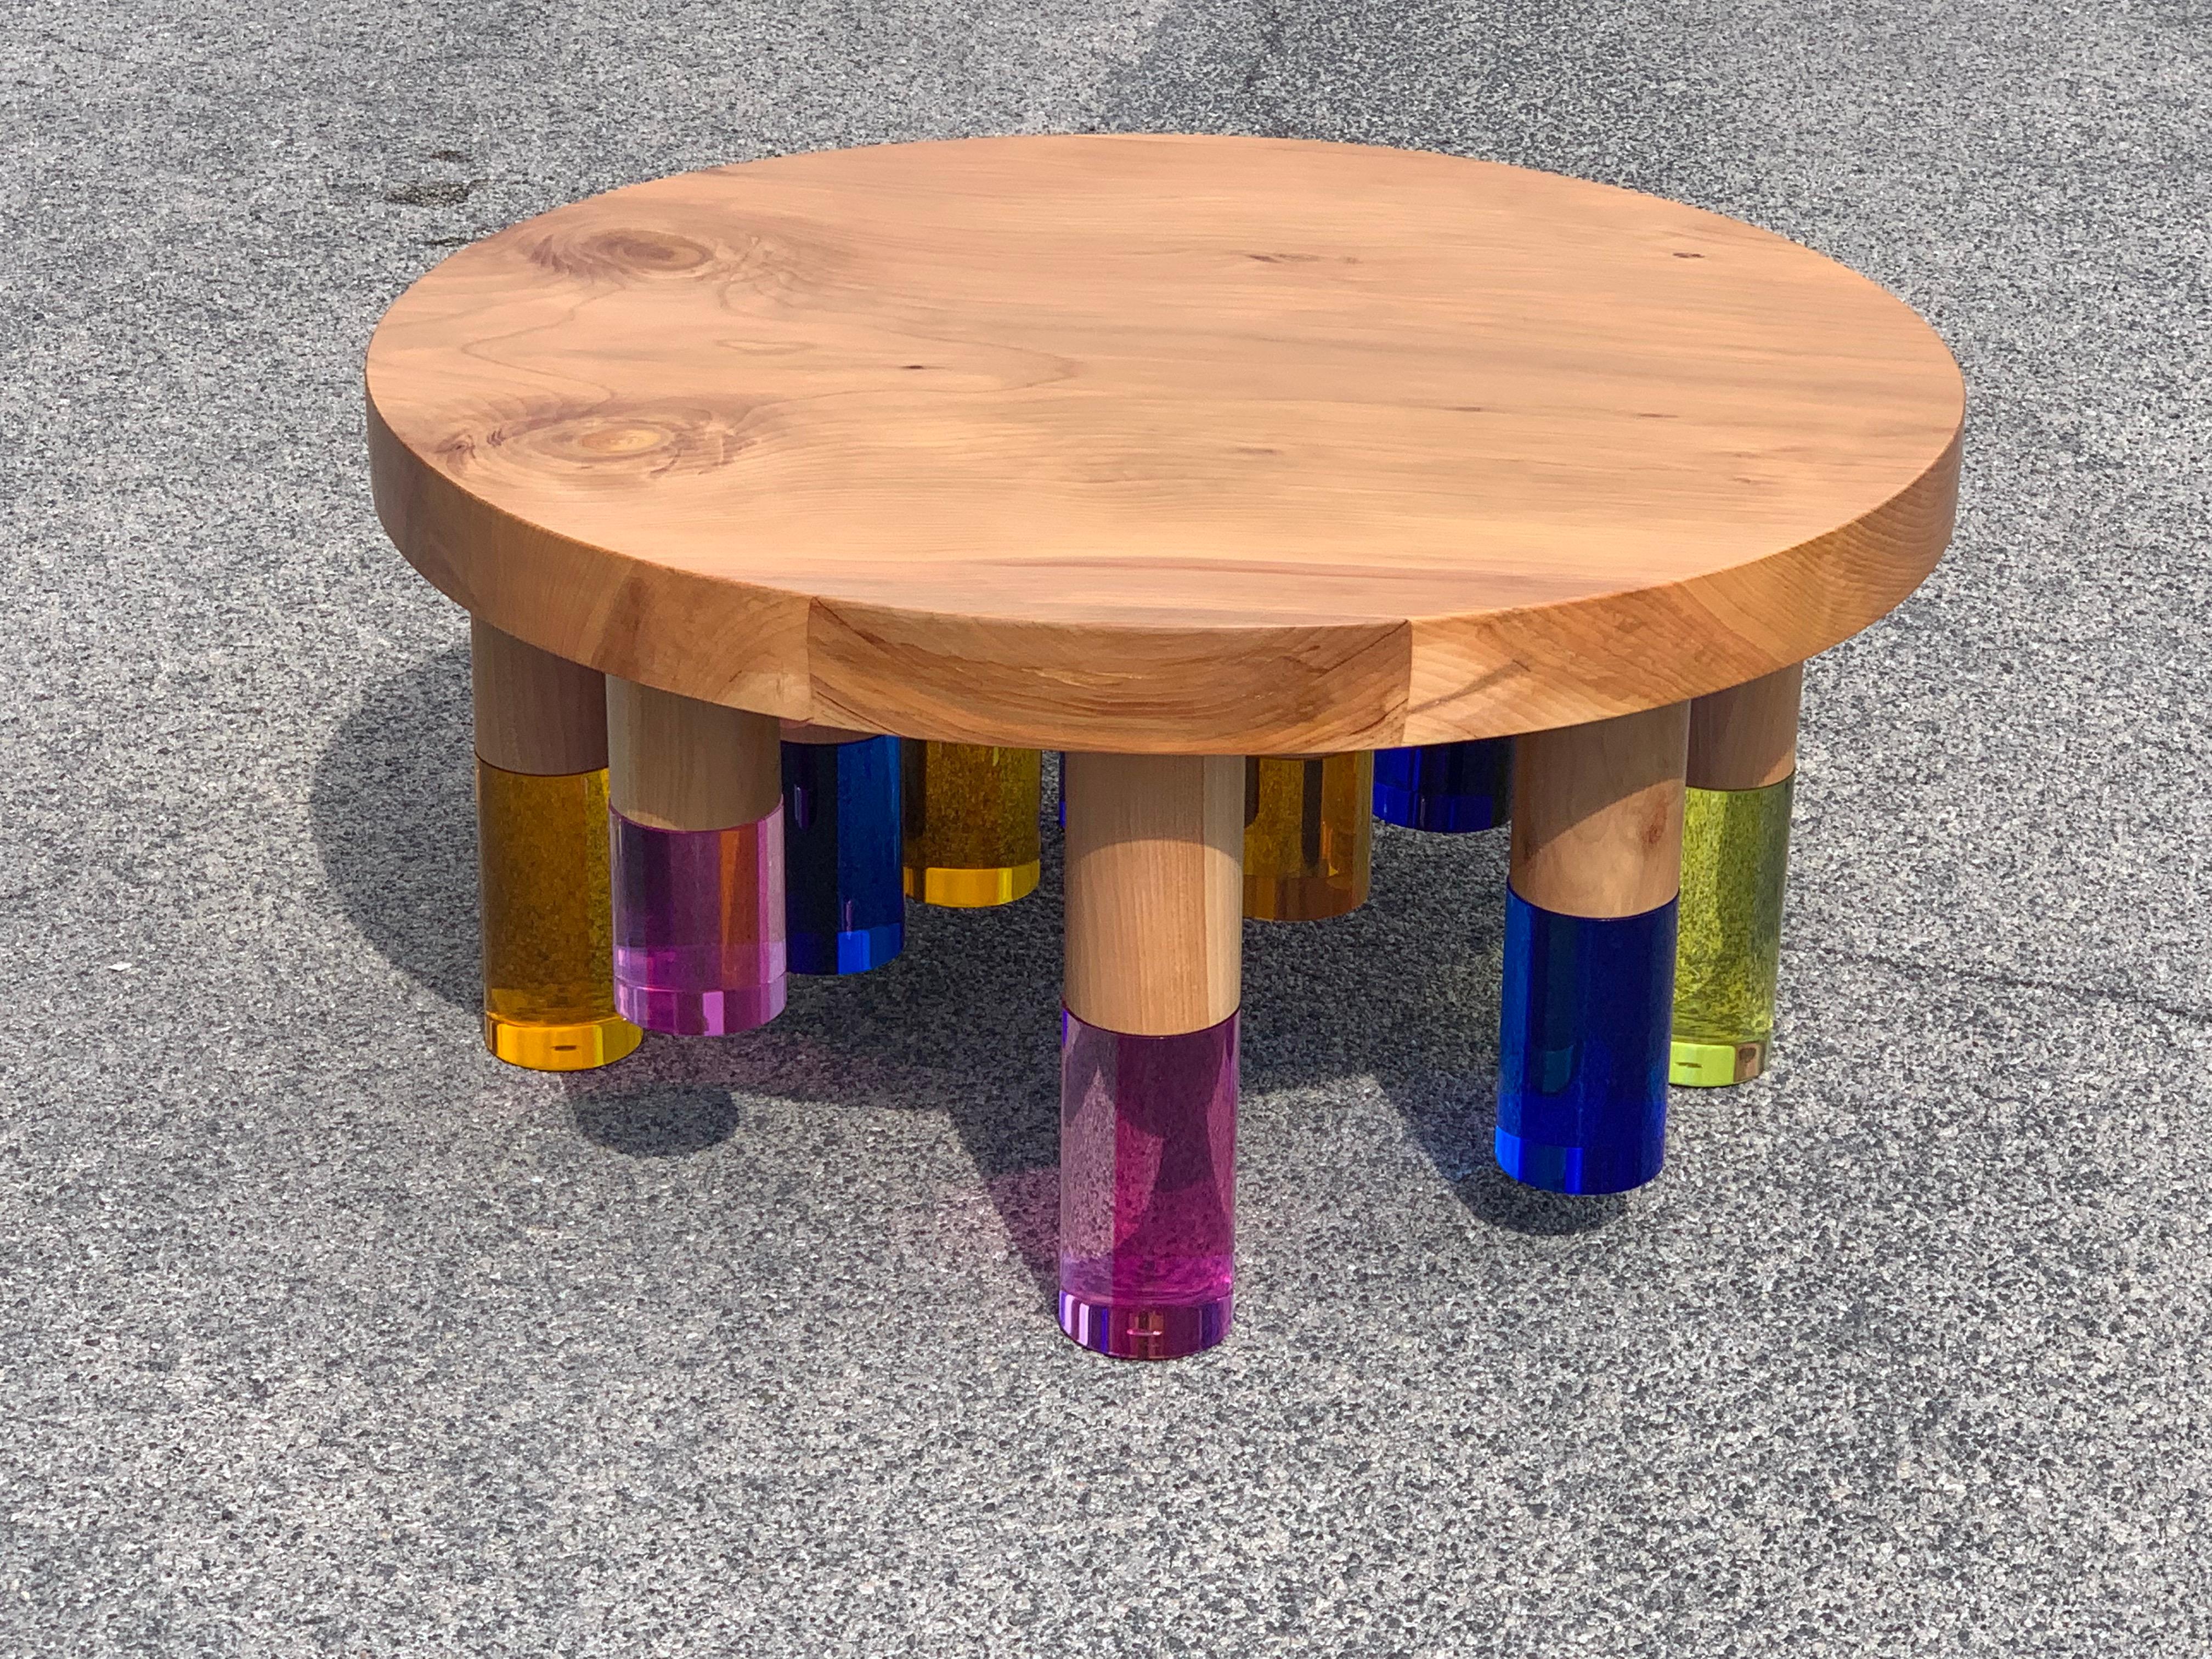 Stalattite model coffee table, round top in cedar of Lebanon and 16 legs composed of stems of unequal height in colored plexiglas and cedar wood, designed by Studio Superego for Superego Editions.

Biography:
Superego editions was born in 2006,